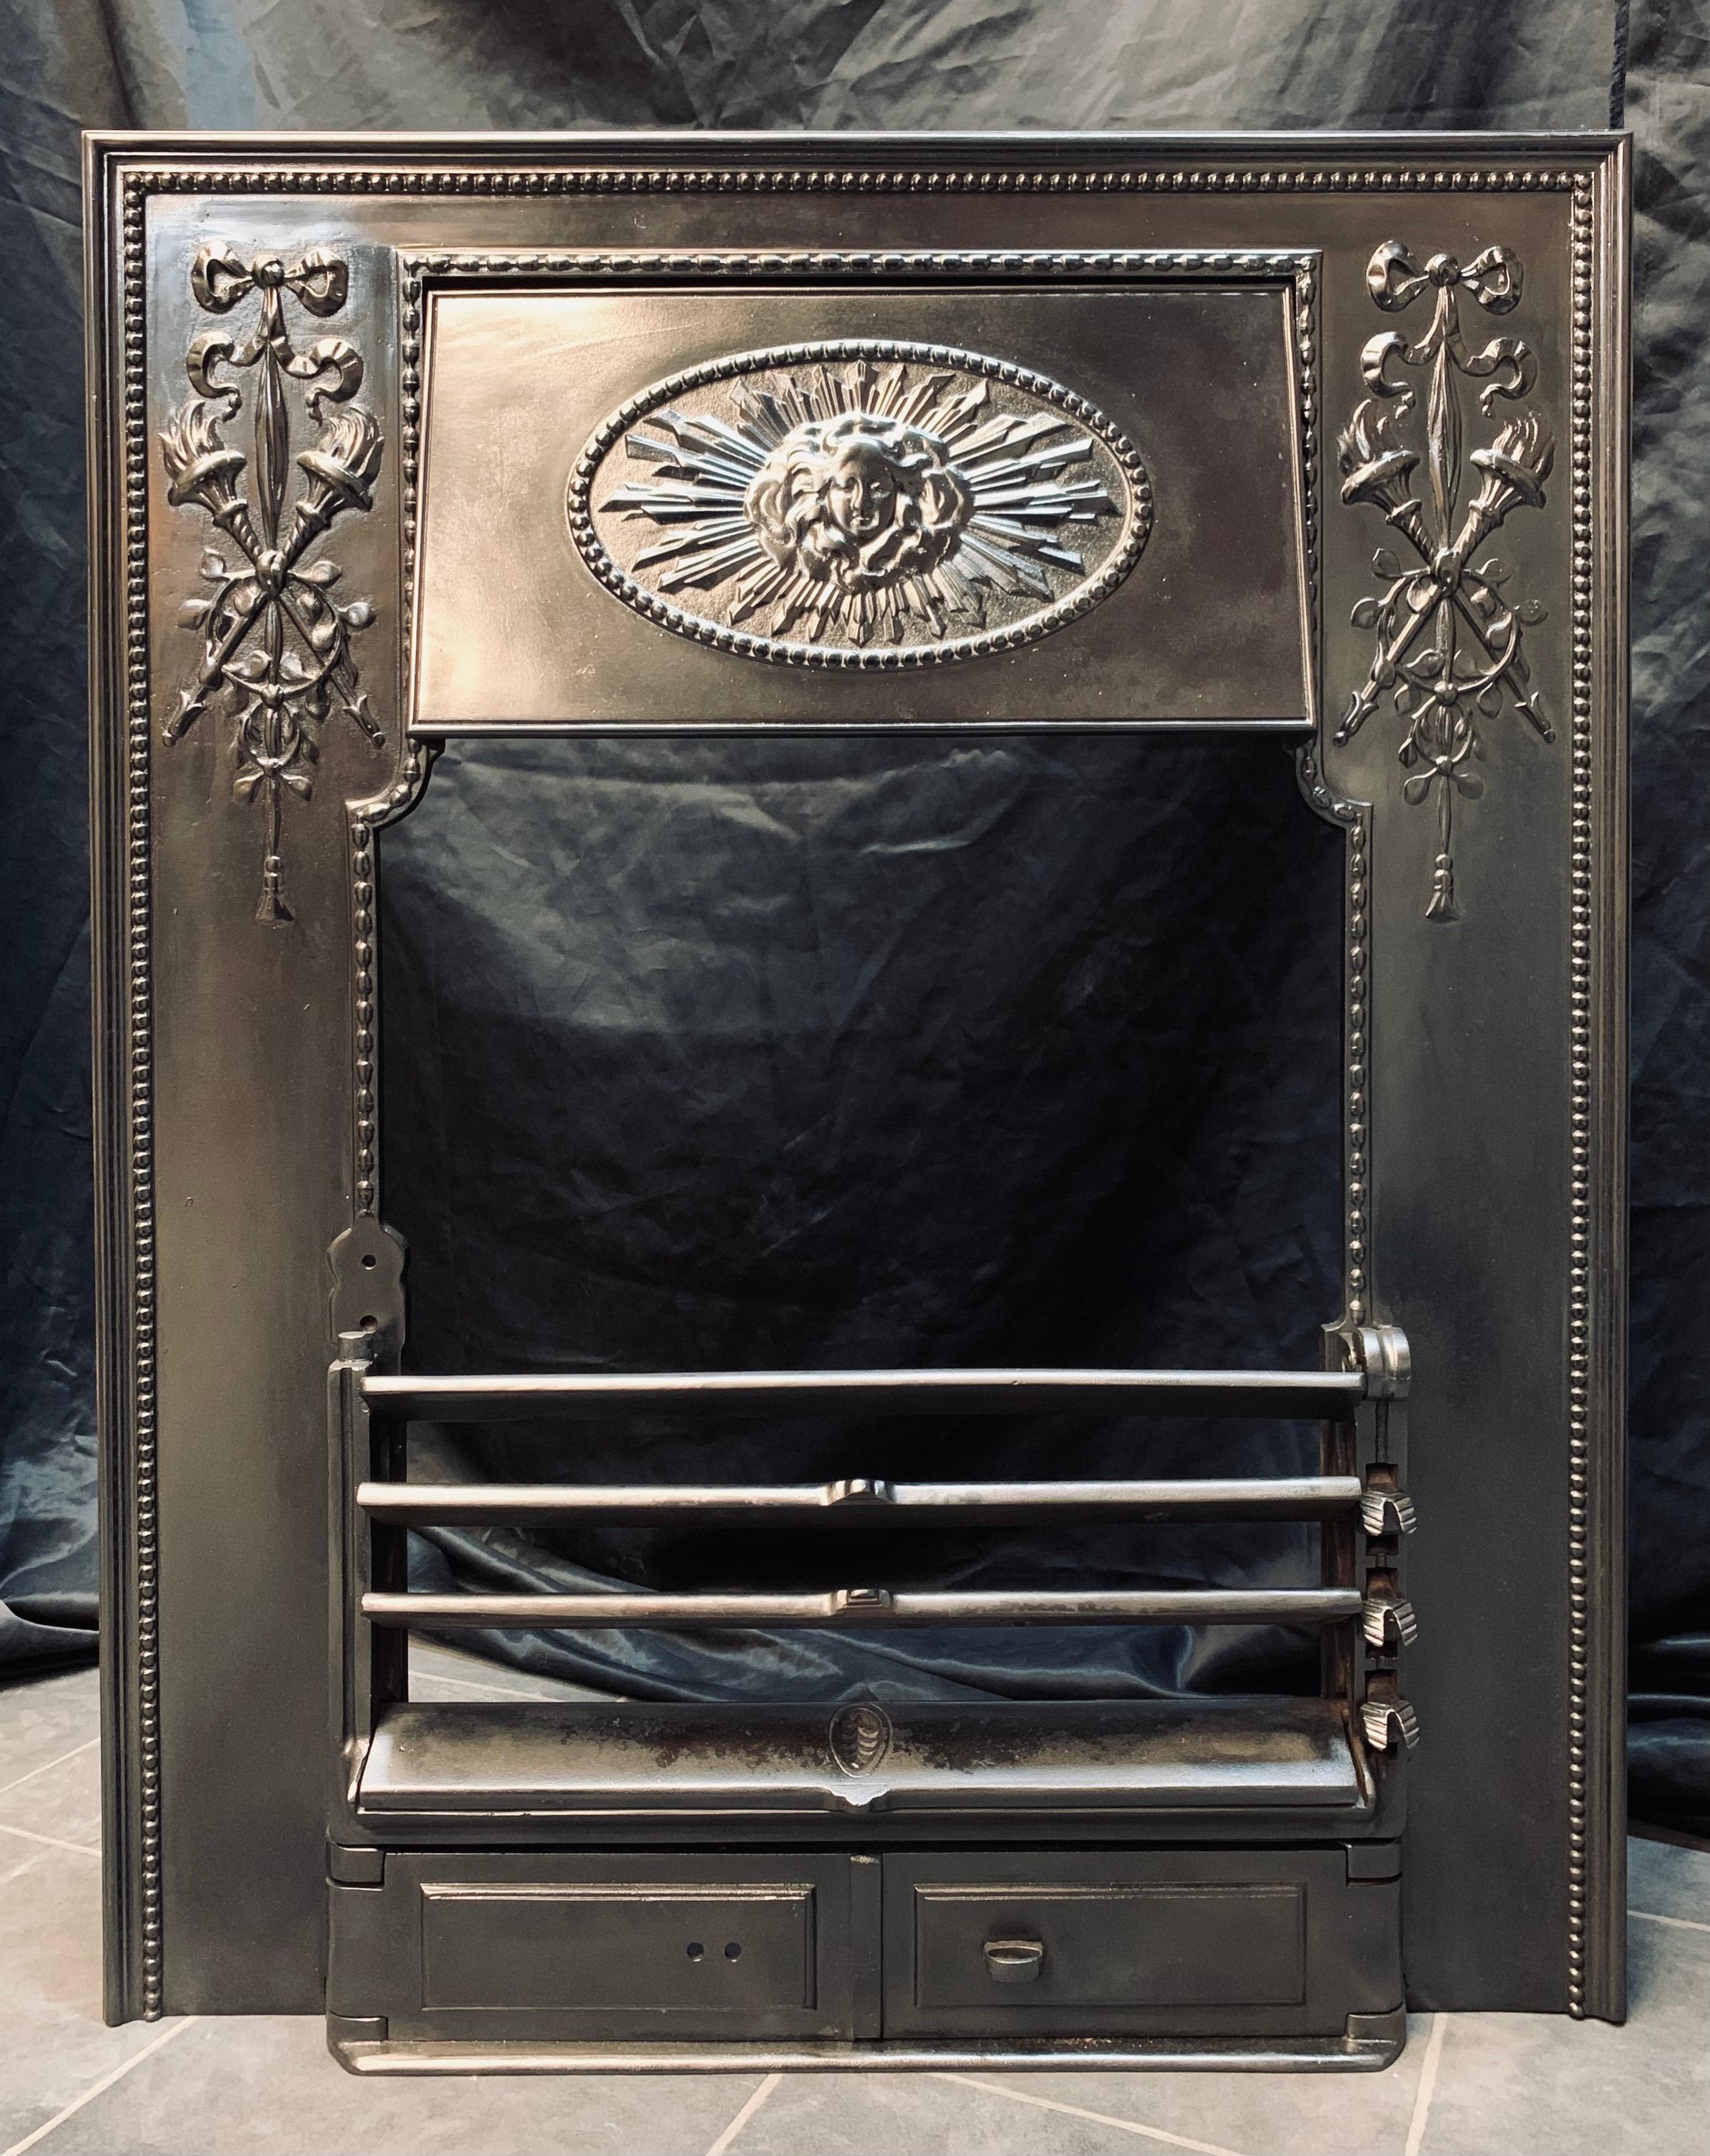 A well cast antique Scottish cast iron fireplace insert probably by Carron of Falkirk. A framed and beaded border with panels of tied ribbon and tassel with crossed flaming torches, a central movable hood set in an oval beaded border with a mask